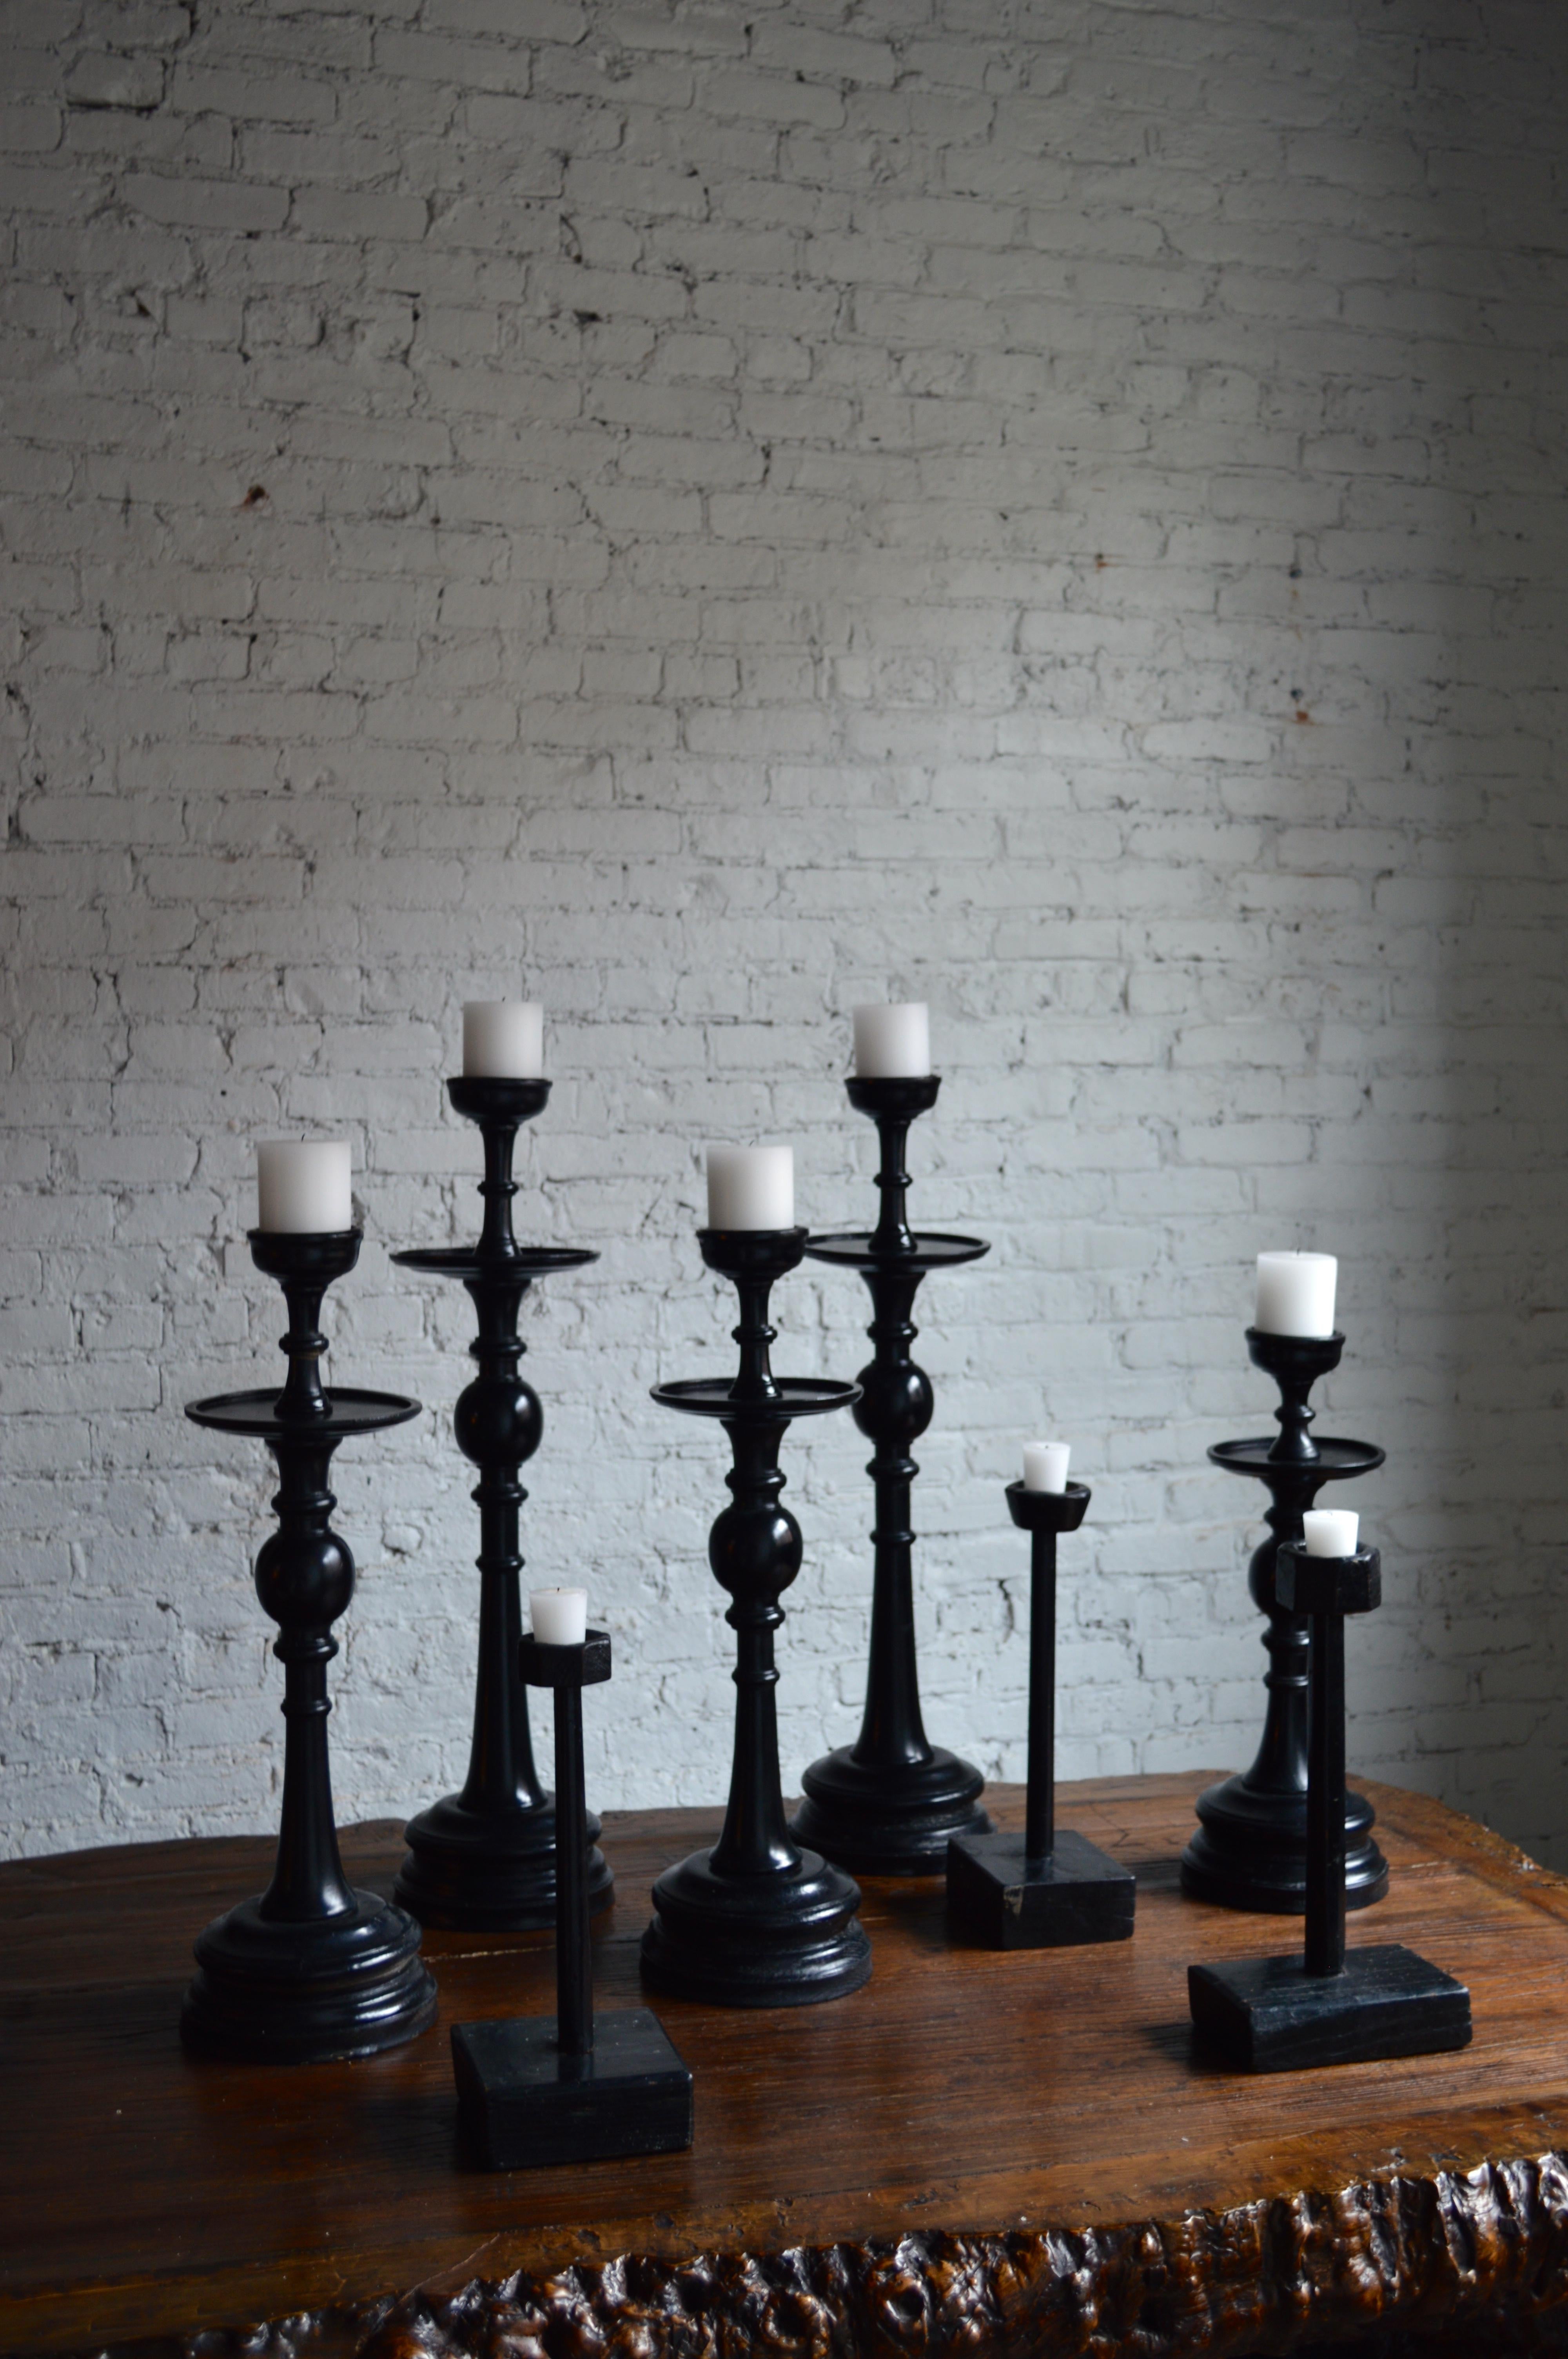 Collection of 20th century and antique Chinese set of eight wooden black lacquer candlesticks

Dimensions range from 15